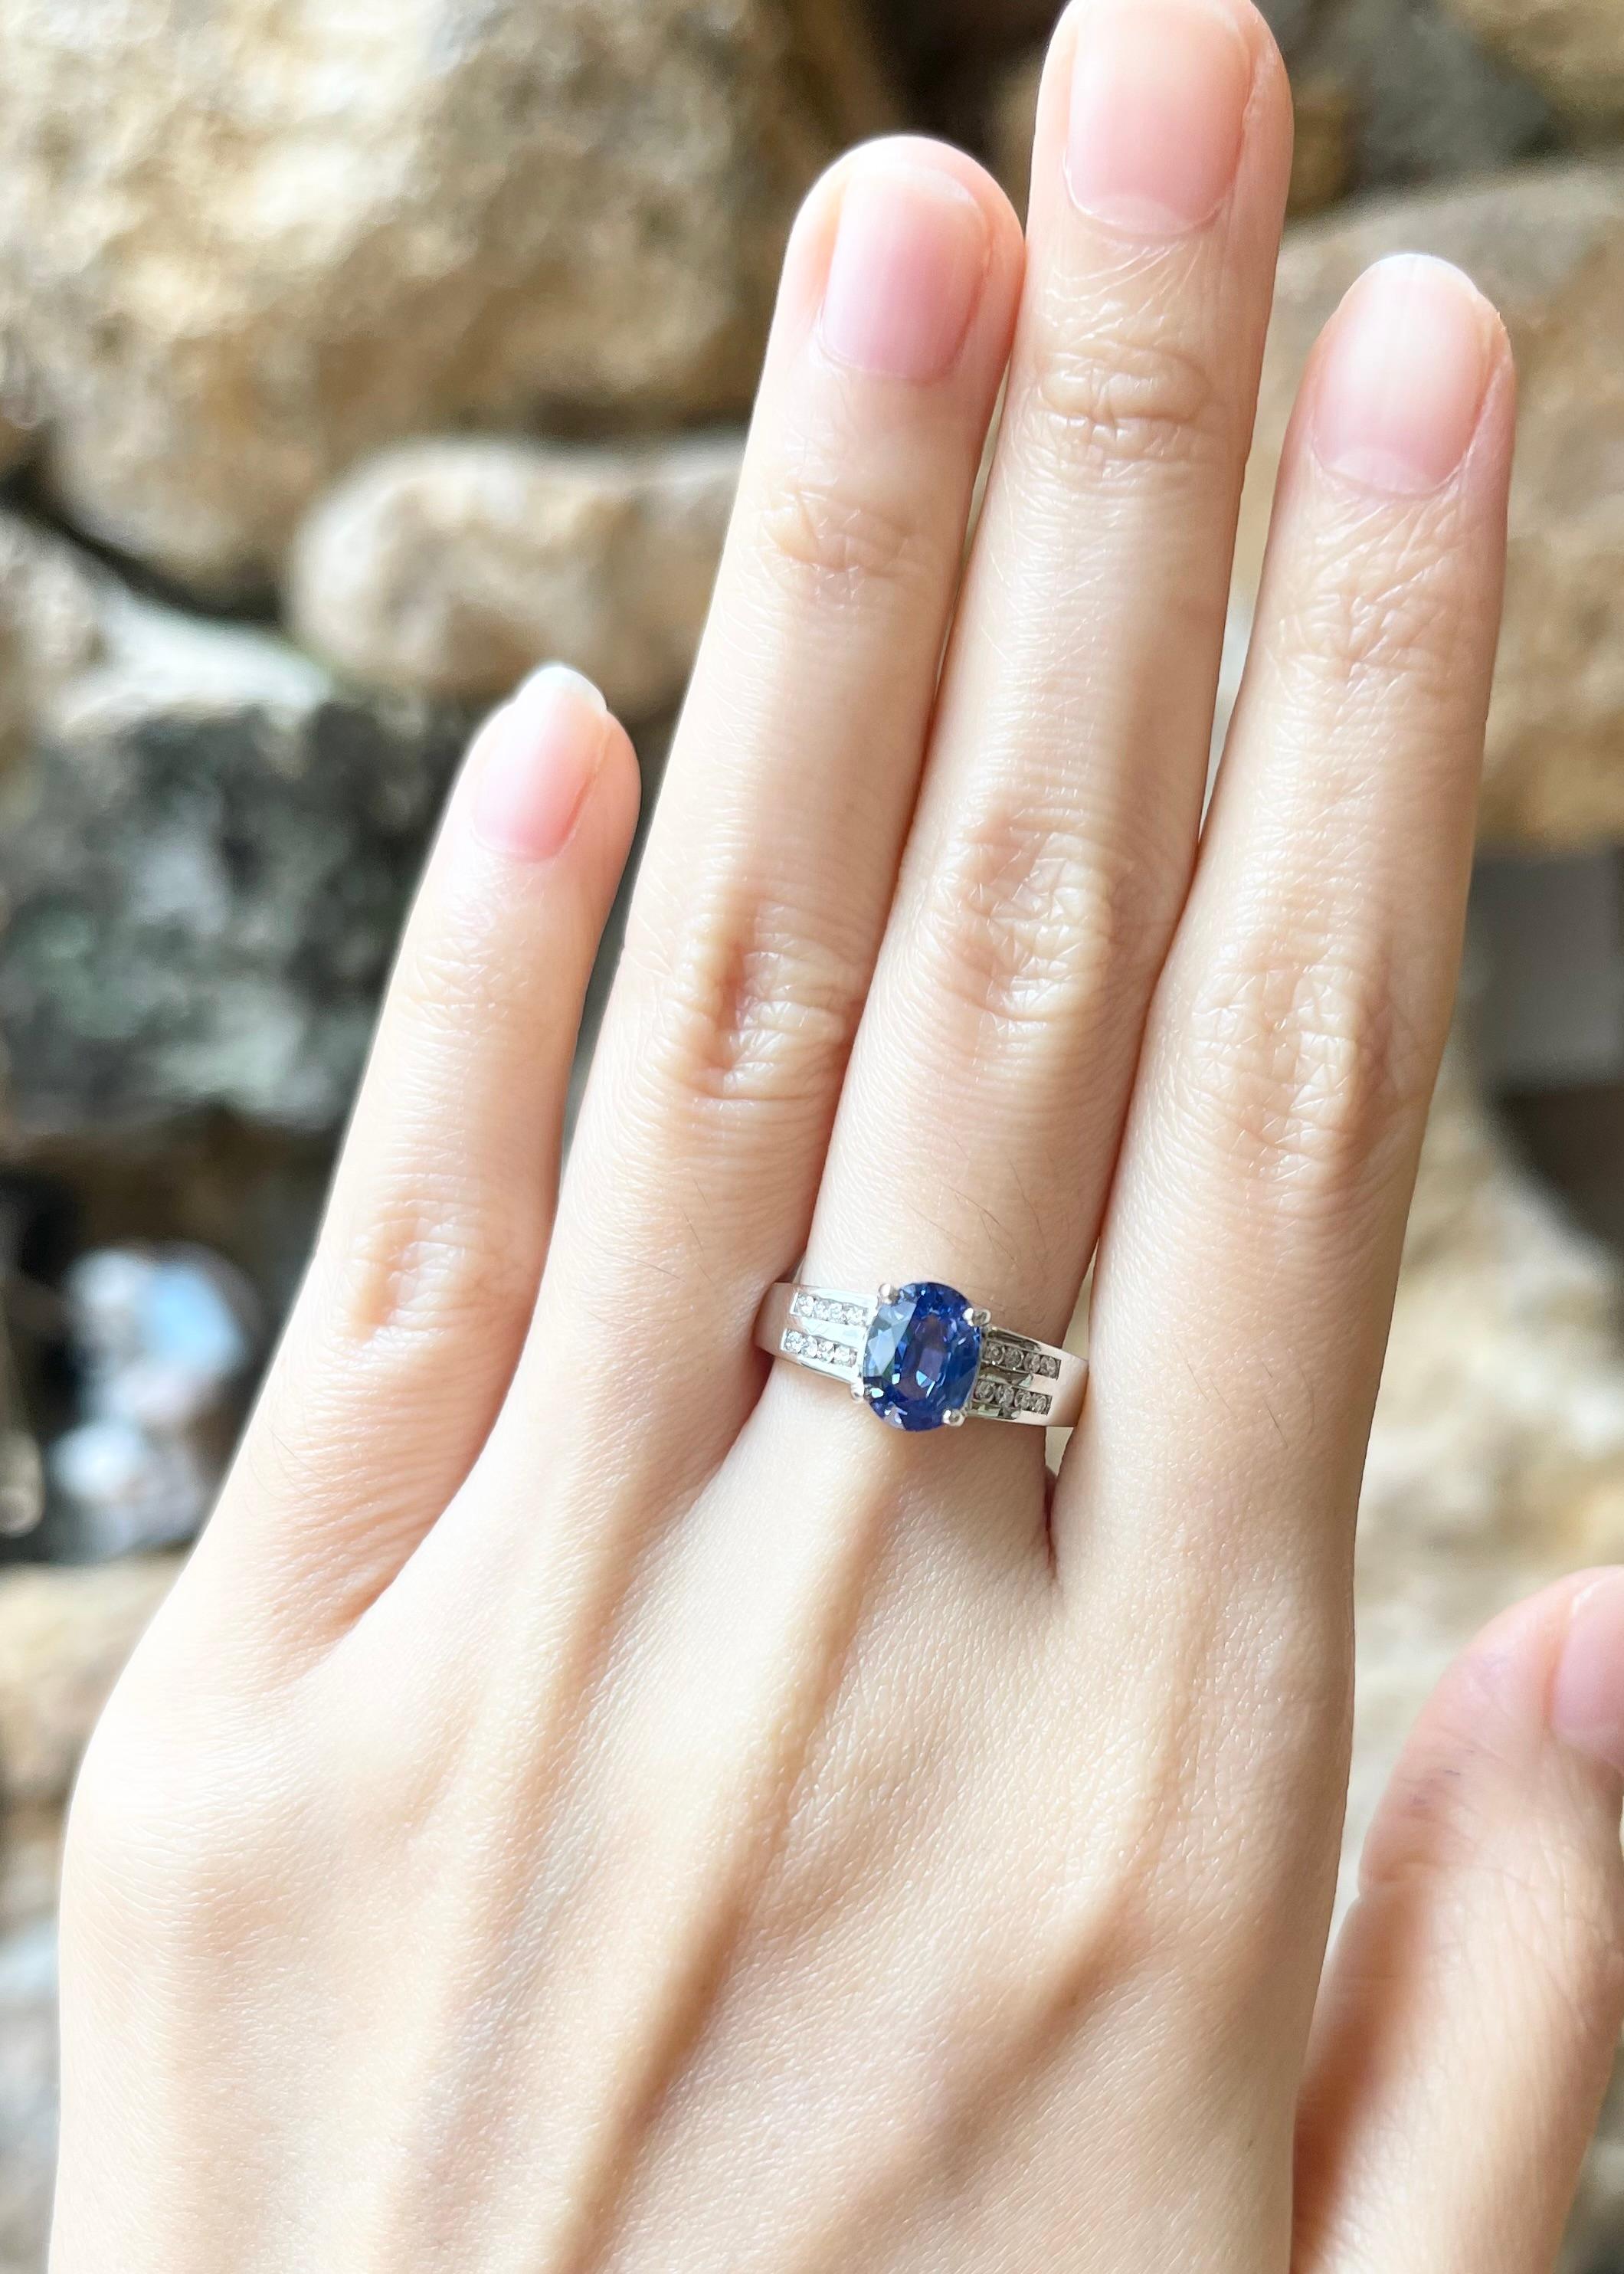 Blue Sapphire 1.53 carats with Diamond 0.15 carat Ring set in 18K White Gold Settings

Width:  0.6 cm 
Length: 0.8 cm
Ring Size: 54
Total Weight: 6.03 grams

